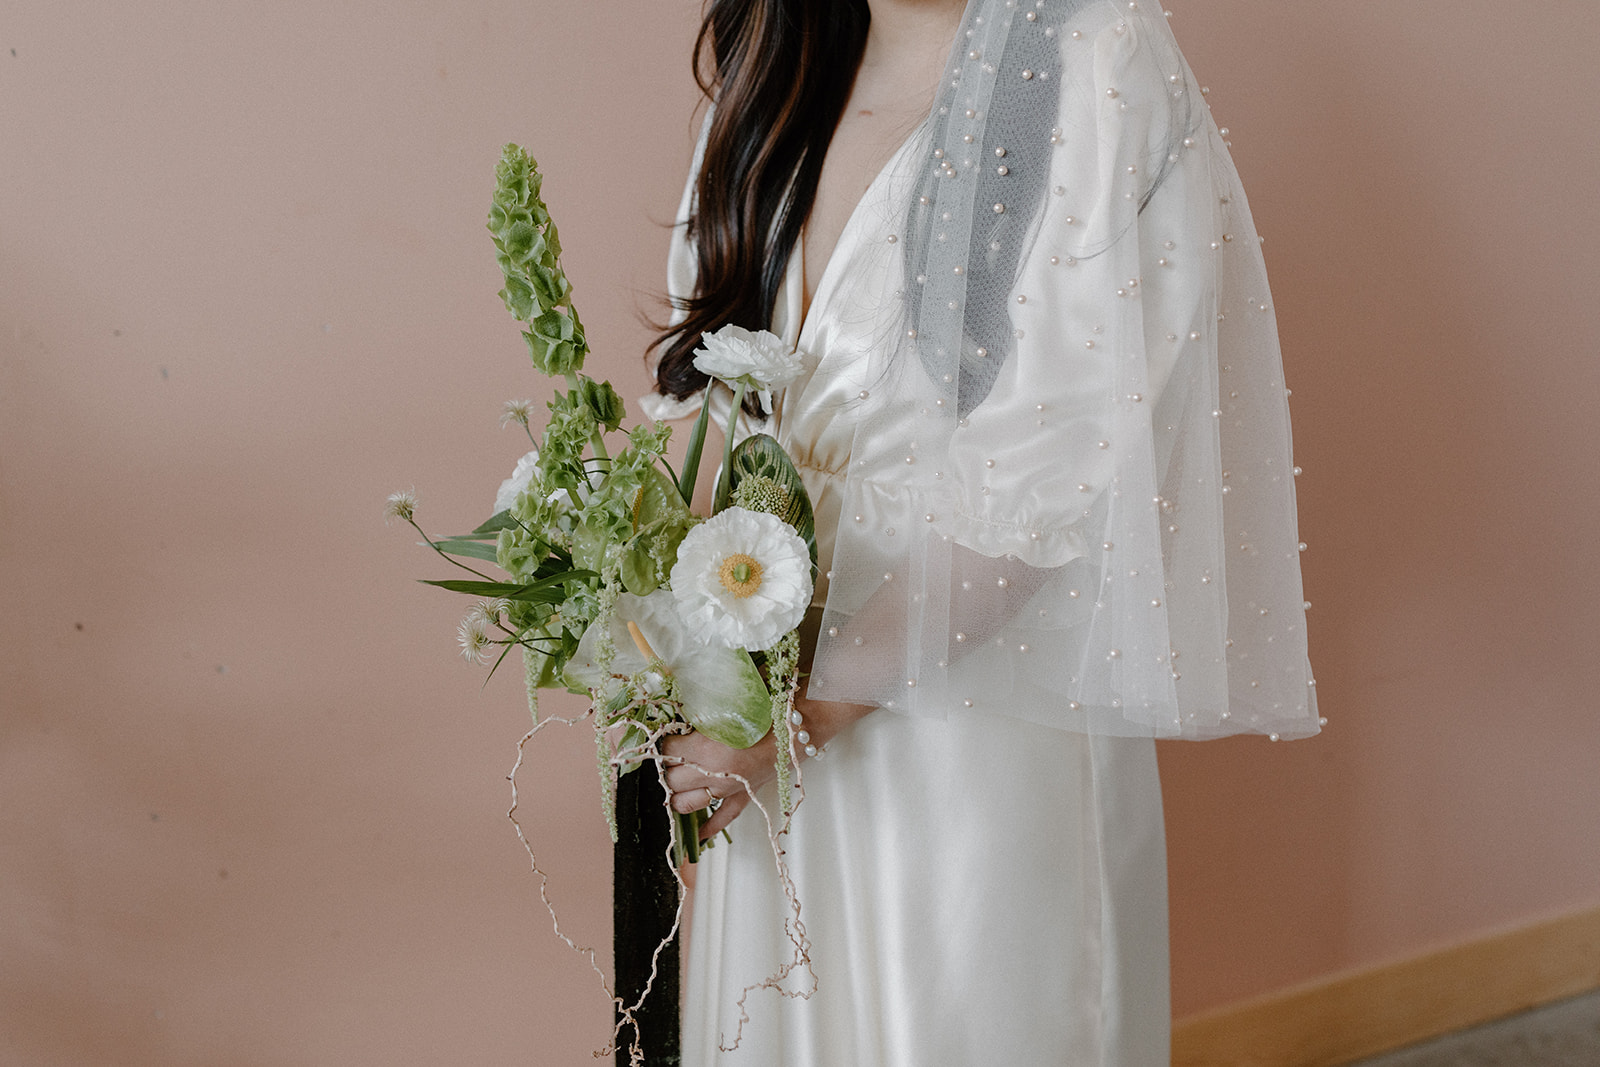 A filipino bride pays homage to her culture with florals and greenery